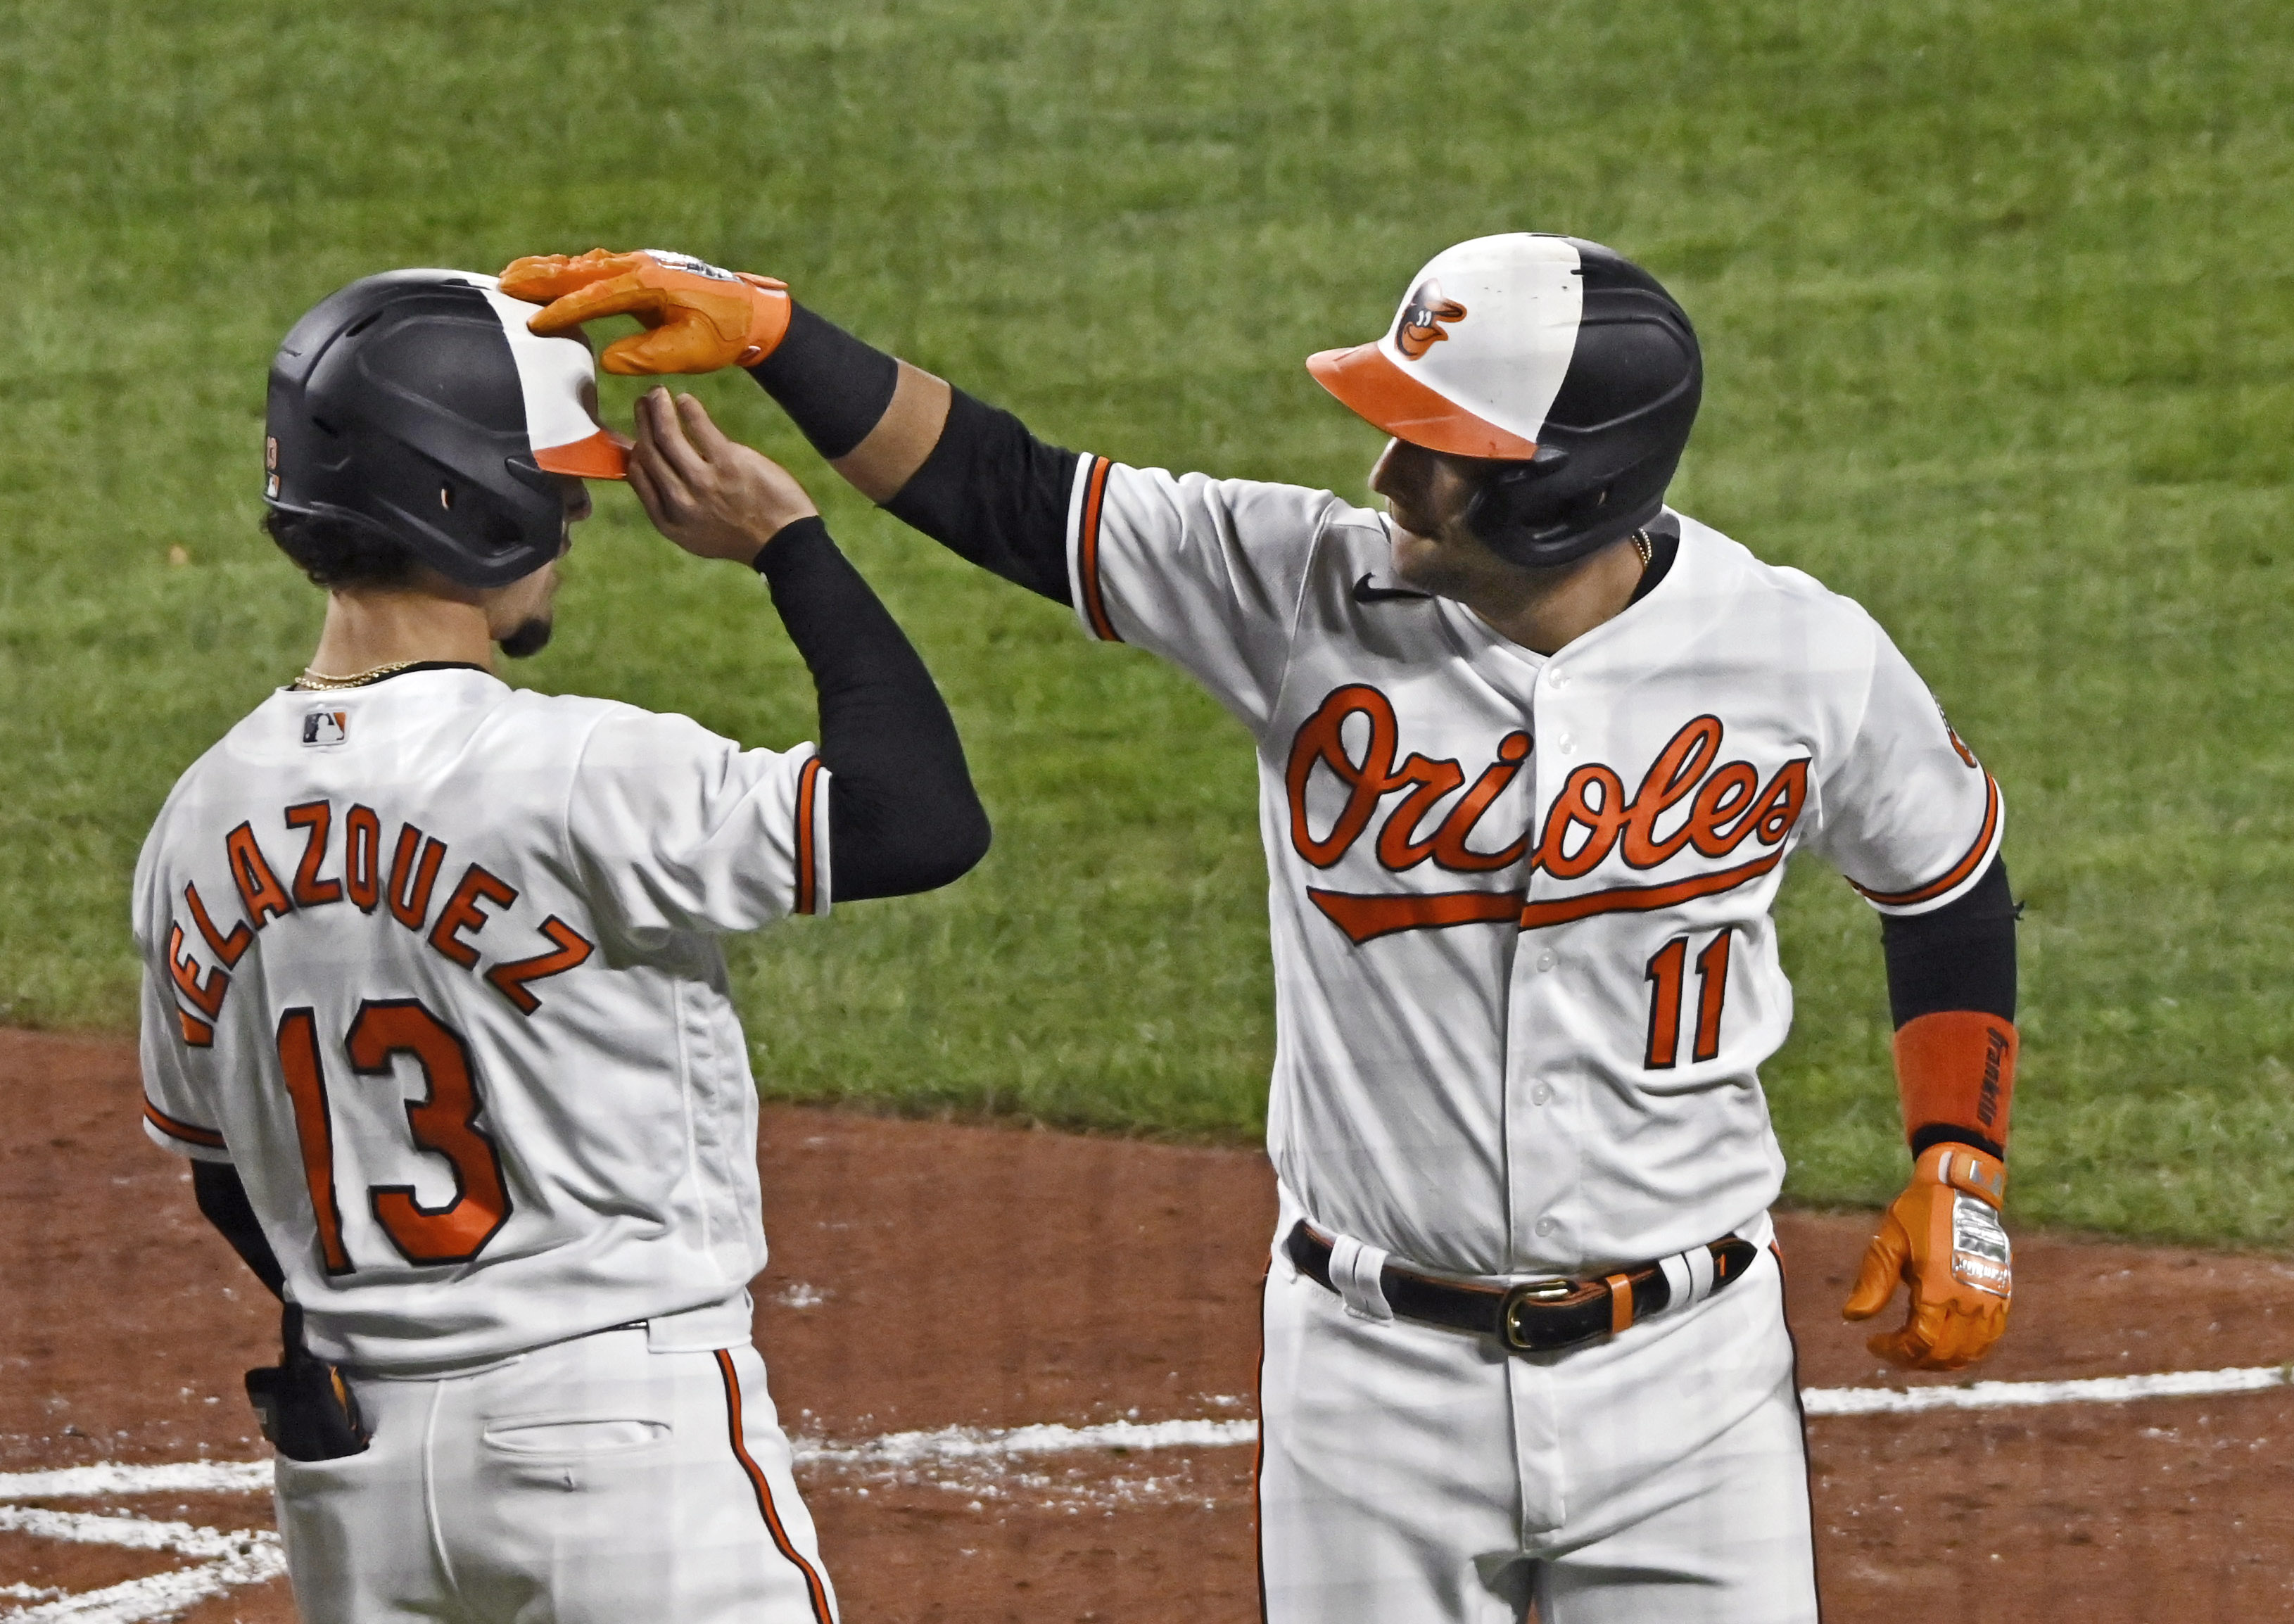 Orioles outscore Royals to take series